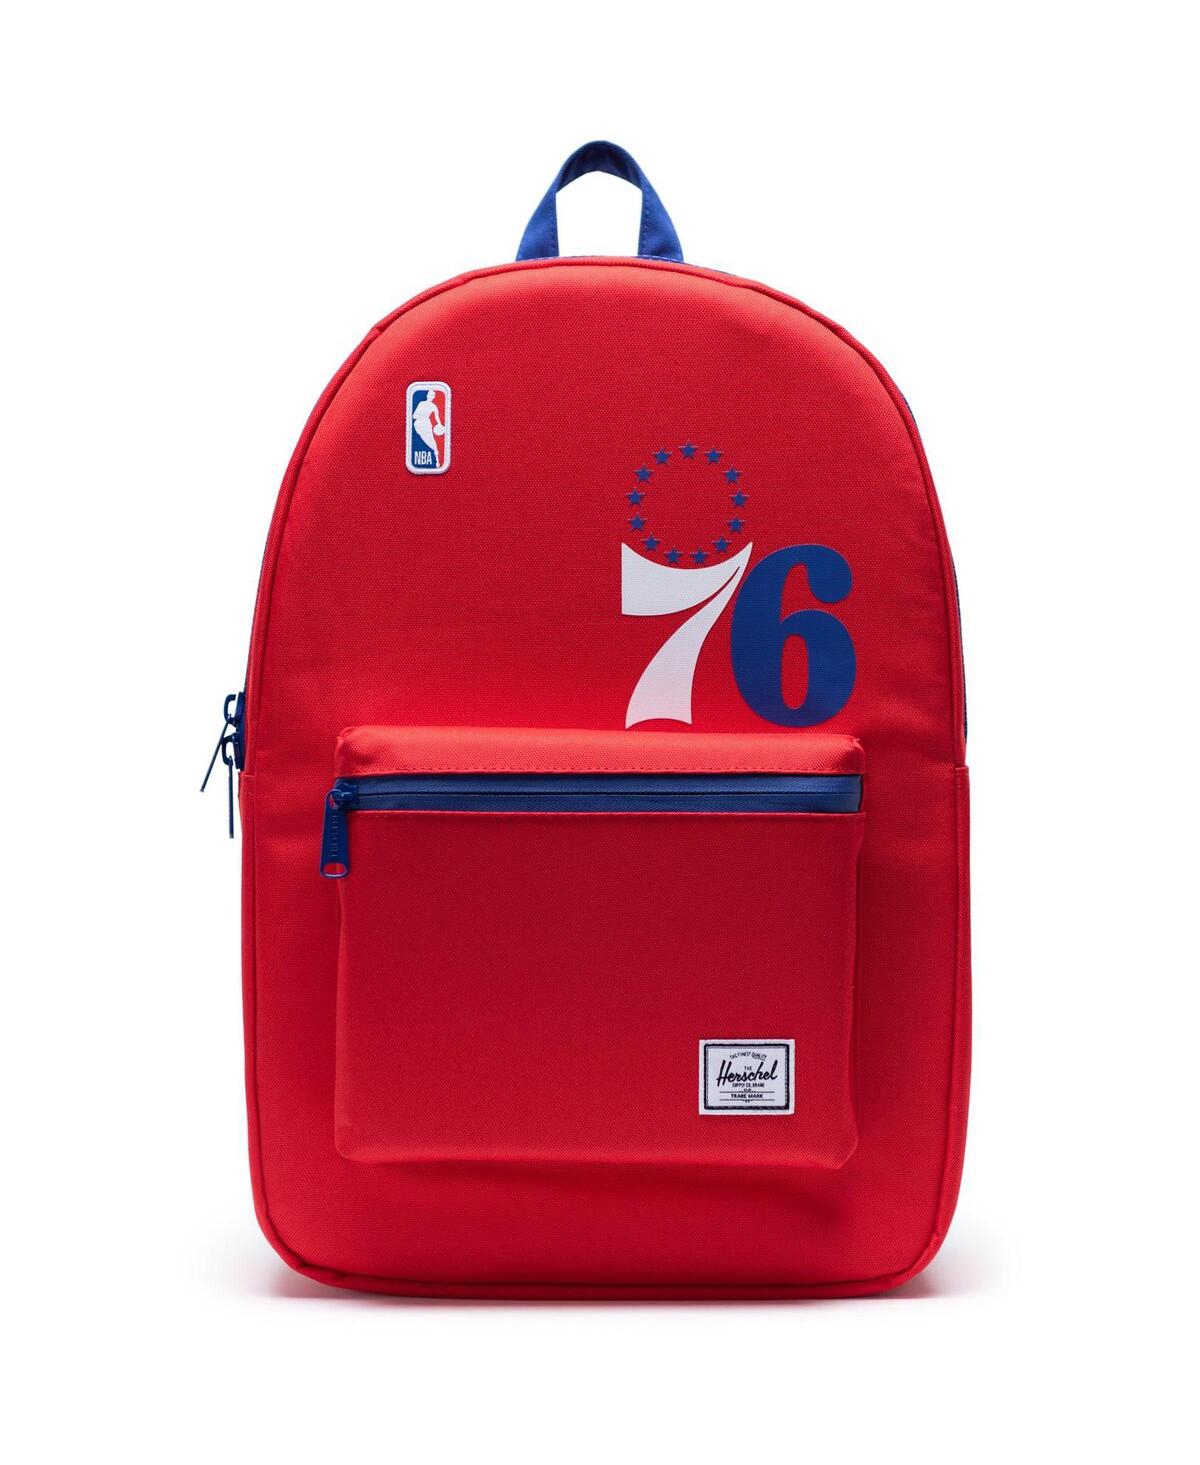 Supply Co. Philadelphia 76ers Statement Backpack - Red